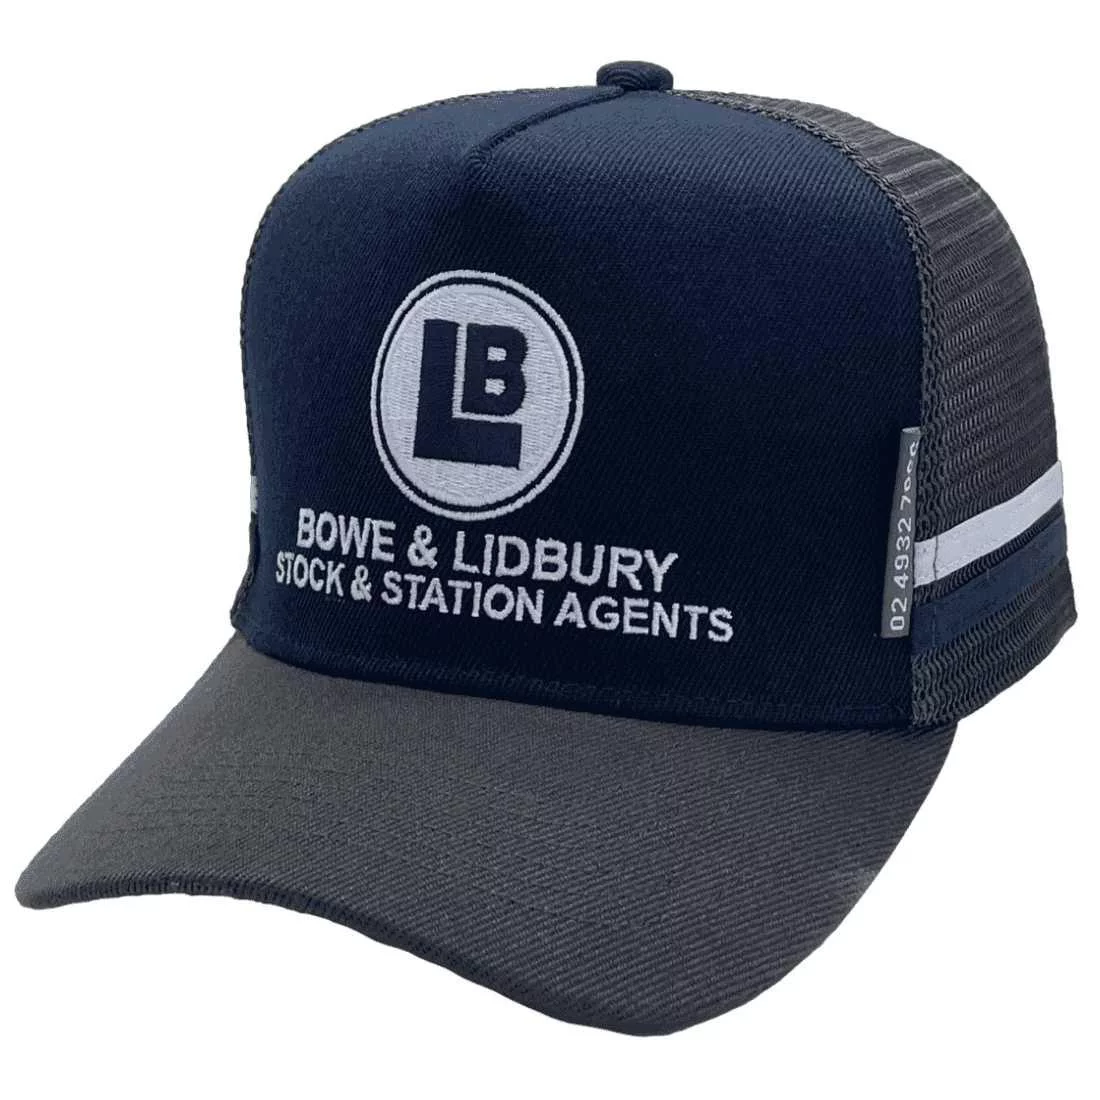 Bowe & Lidbury Stock & Station Agents HP Original Midrange Aussie Trucker Hats with double side bands Acrylic Charcoal & Navy